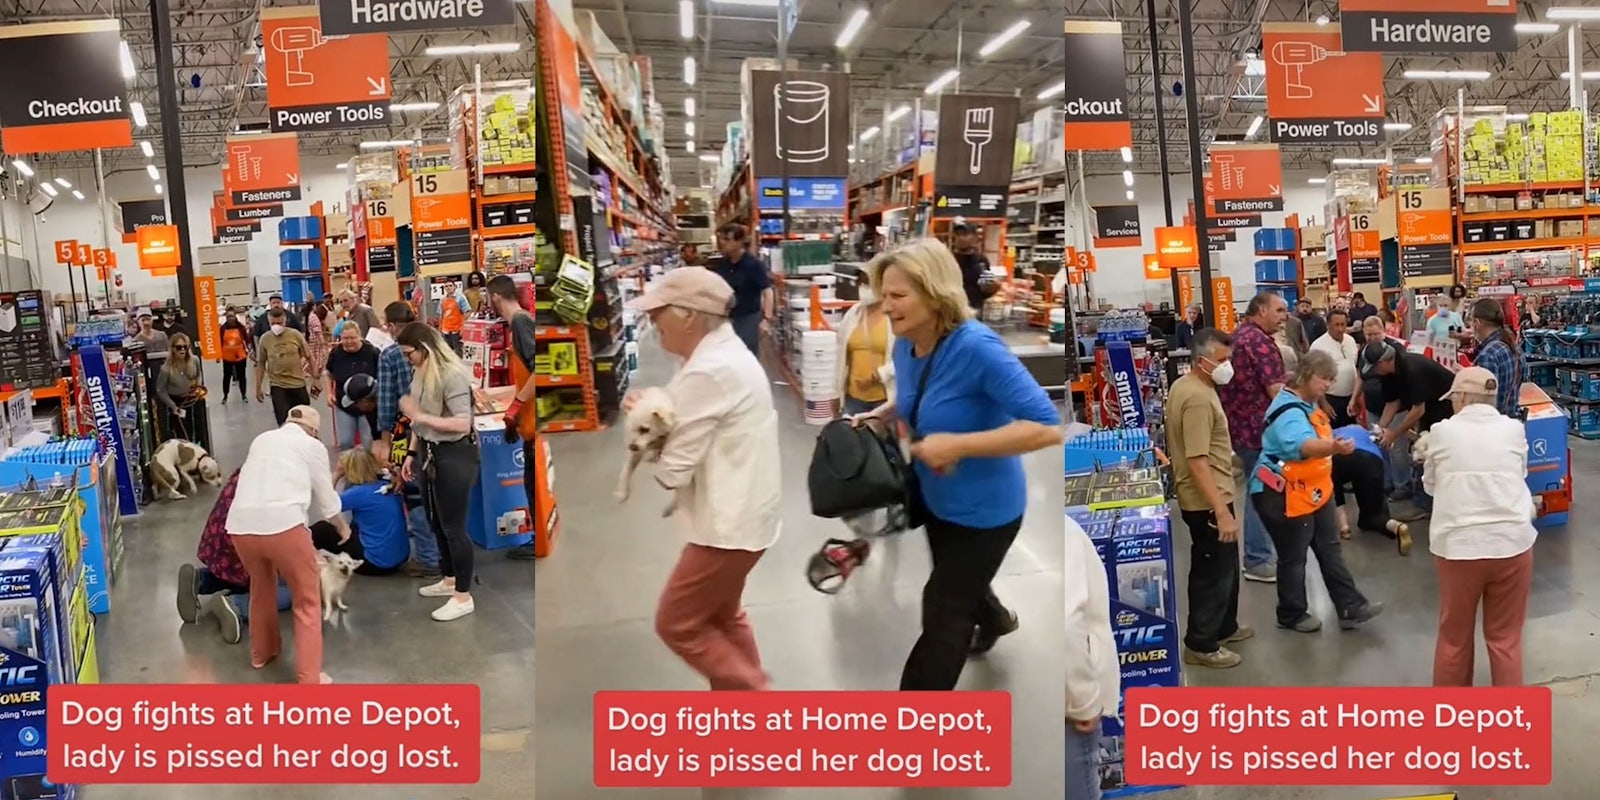 Home Depot checkout area woman on floor dogs barking people surrounding caption 'Dog fights at Home Depot, lady is pissed her dog lost.' (l) Women holding small white dog walking away caption 'Dog fights at Home Depot, lady is pissed her dog lost>' (c) woman getting help up off of floor by group of people caption 'Dog fights in Home Depot. lady is mad her dog lost.' (r)